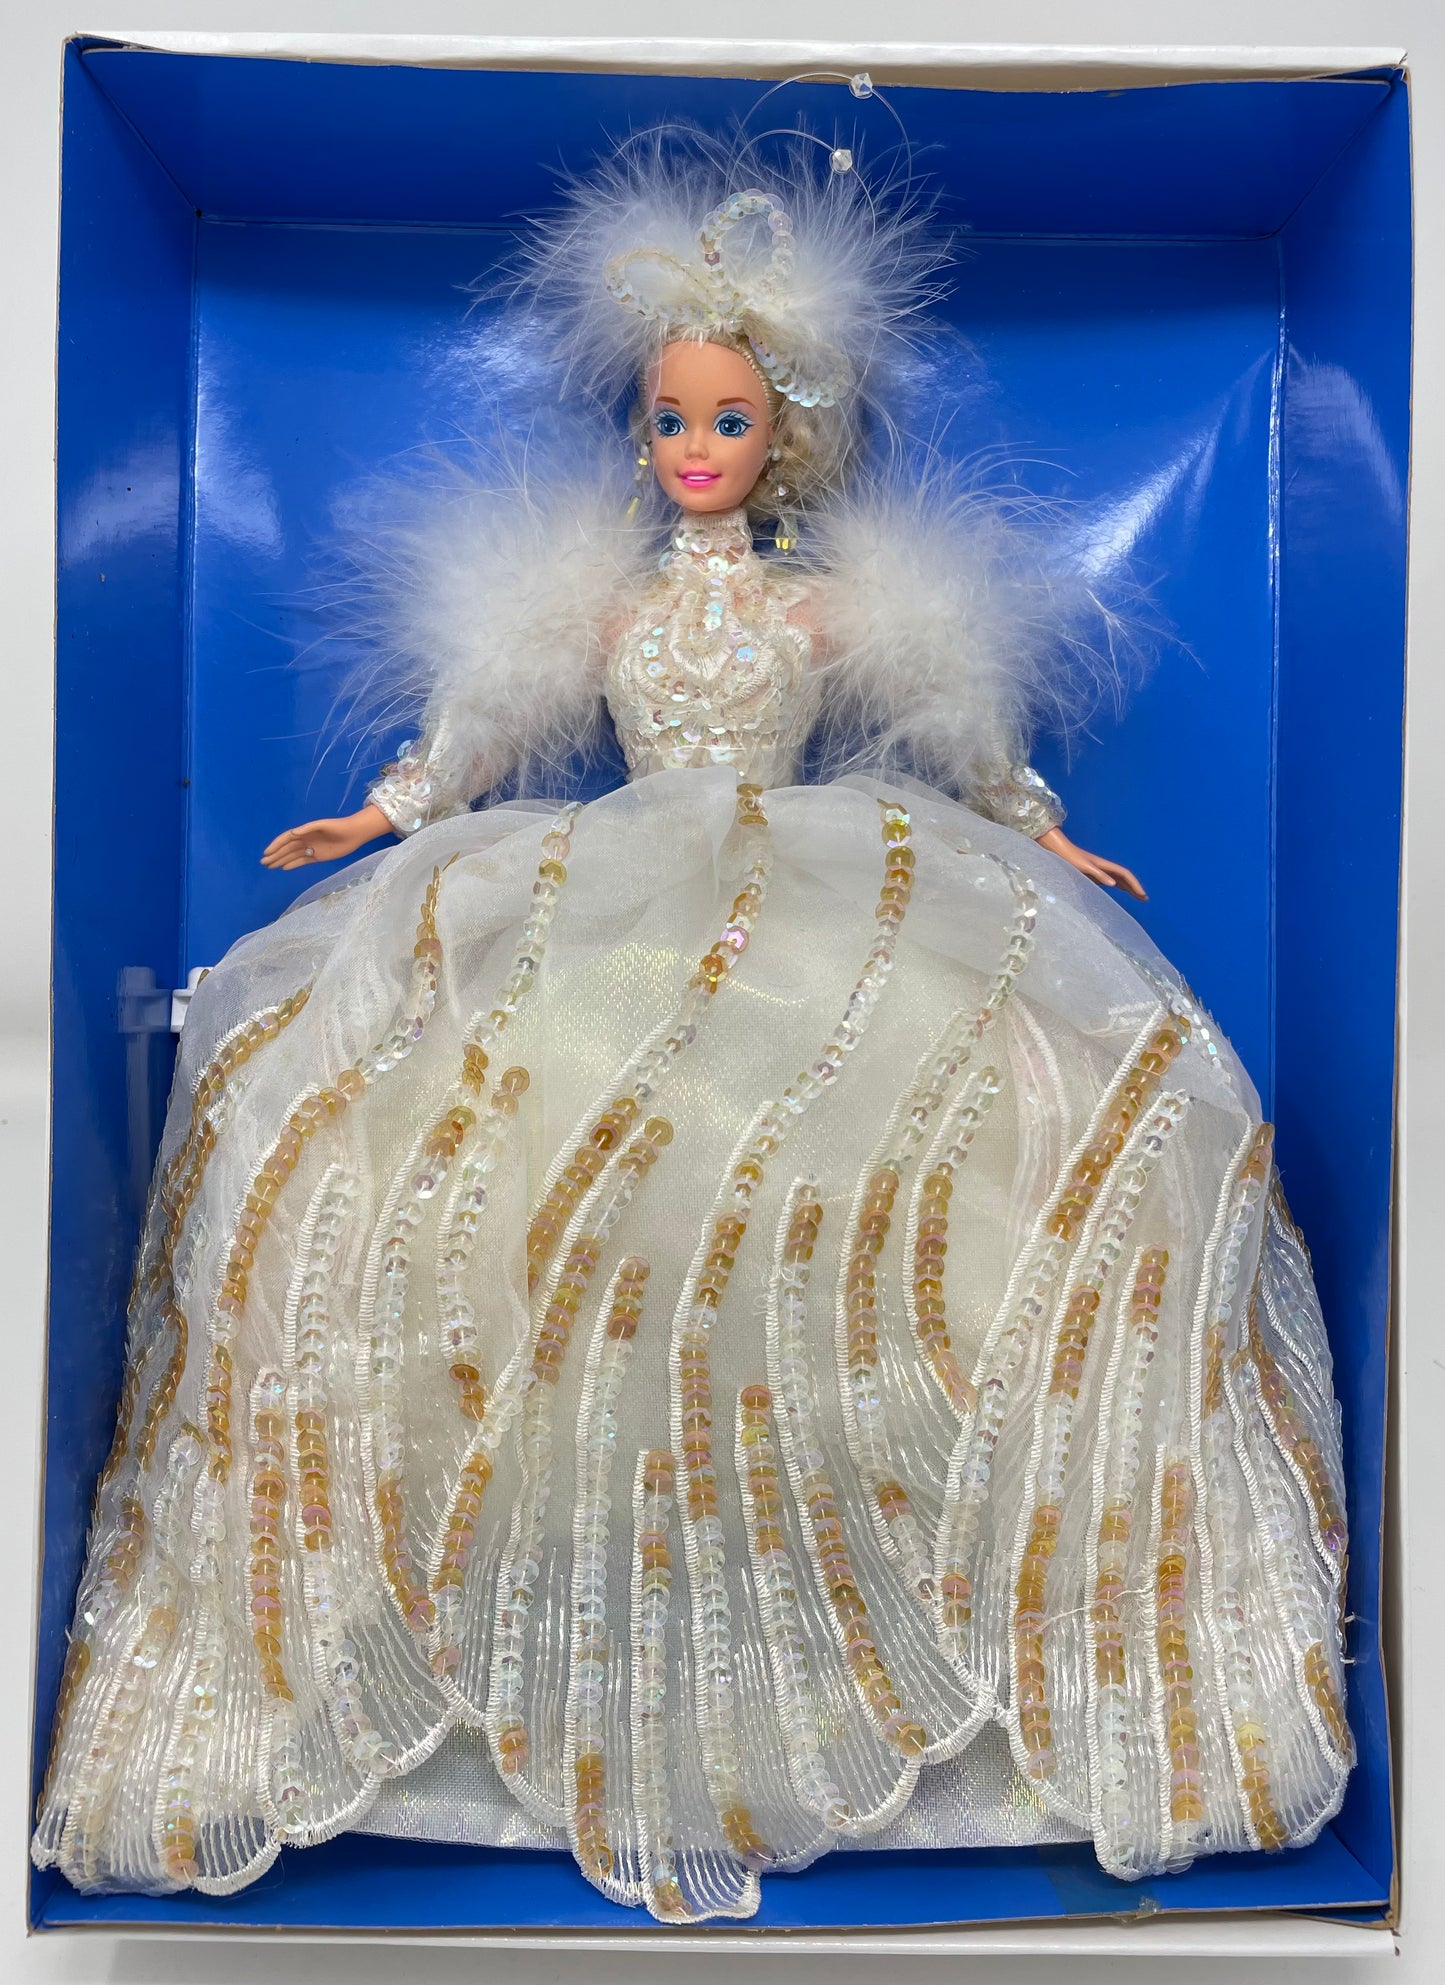 SNOW PRINCESS BARBIE  - BLONDE - ENCHANTED SEASONS COLLECTION - LIMITED EDITION - #11875 - MATTEL 1994